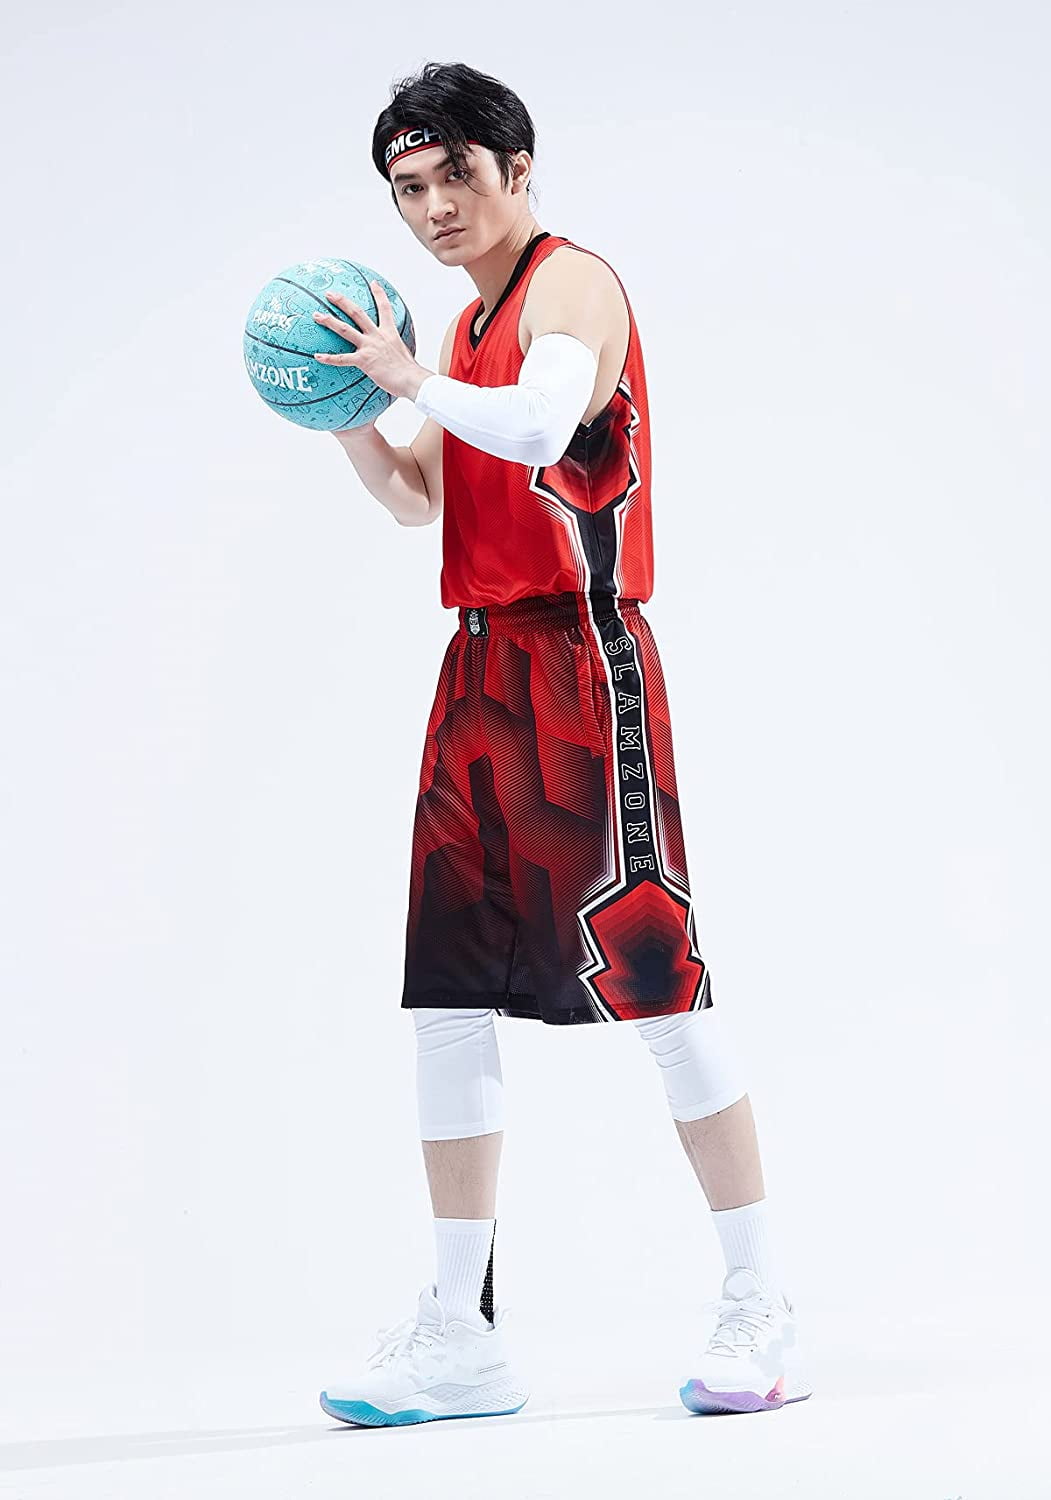  Basketball Jersey Shirt and Shorts for Men Boys, Team Uniform  Sportswear, Cartoon Doodle Ball Book Multi : Clothing, Shoes & Jewelry